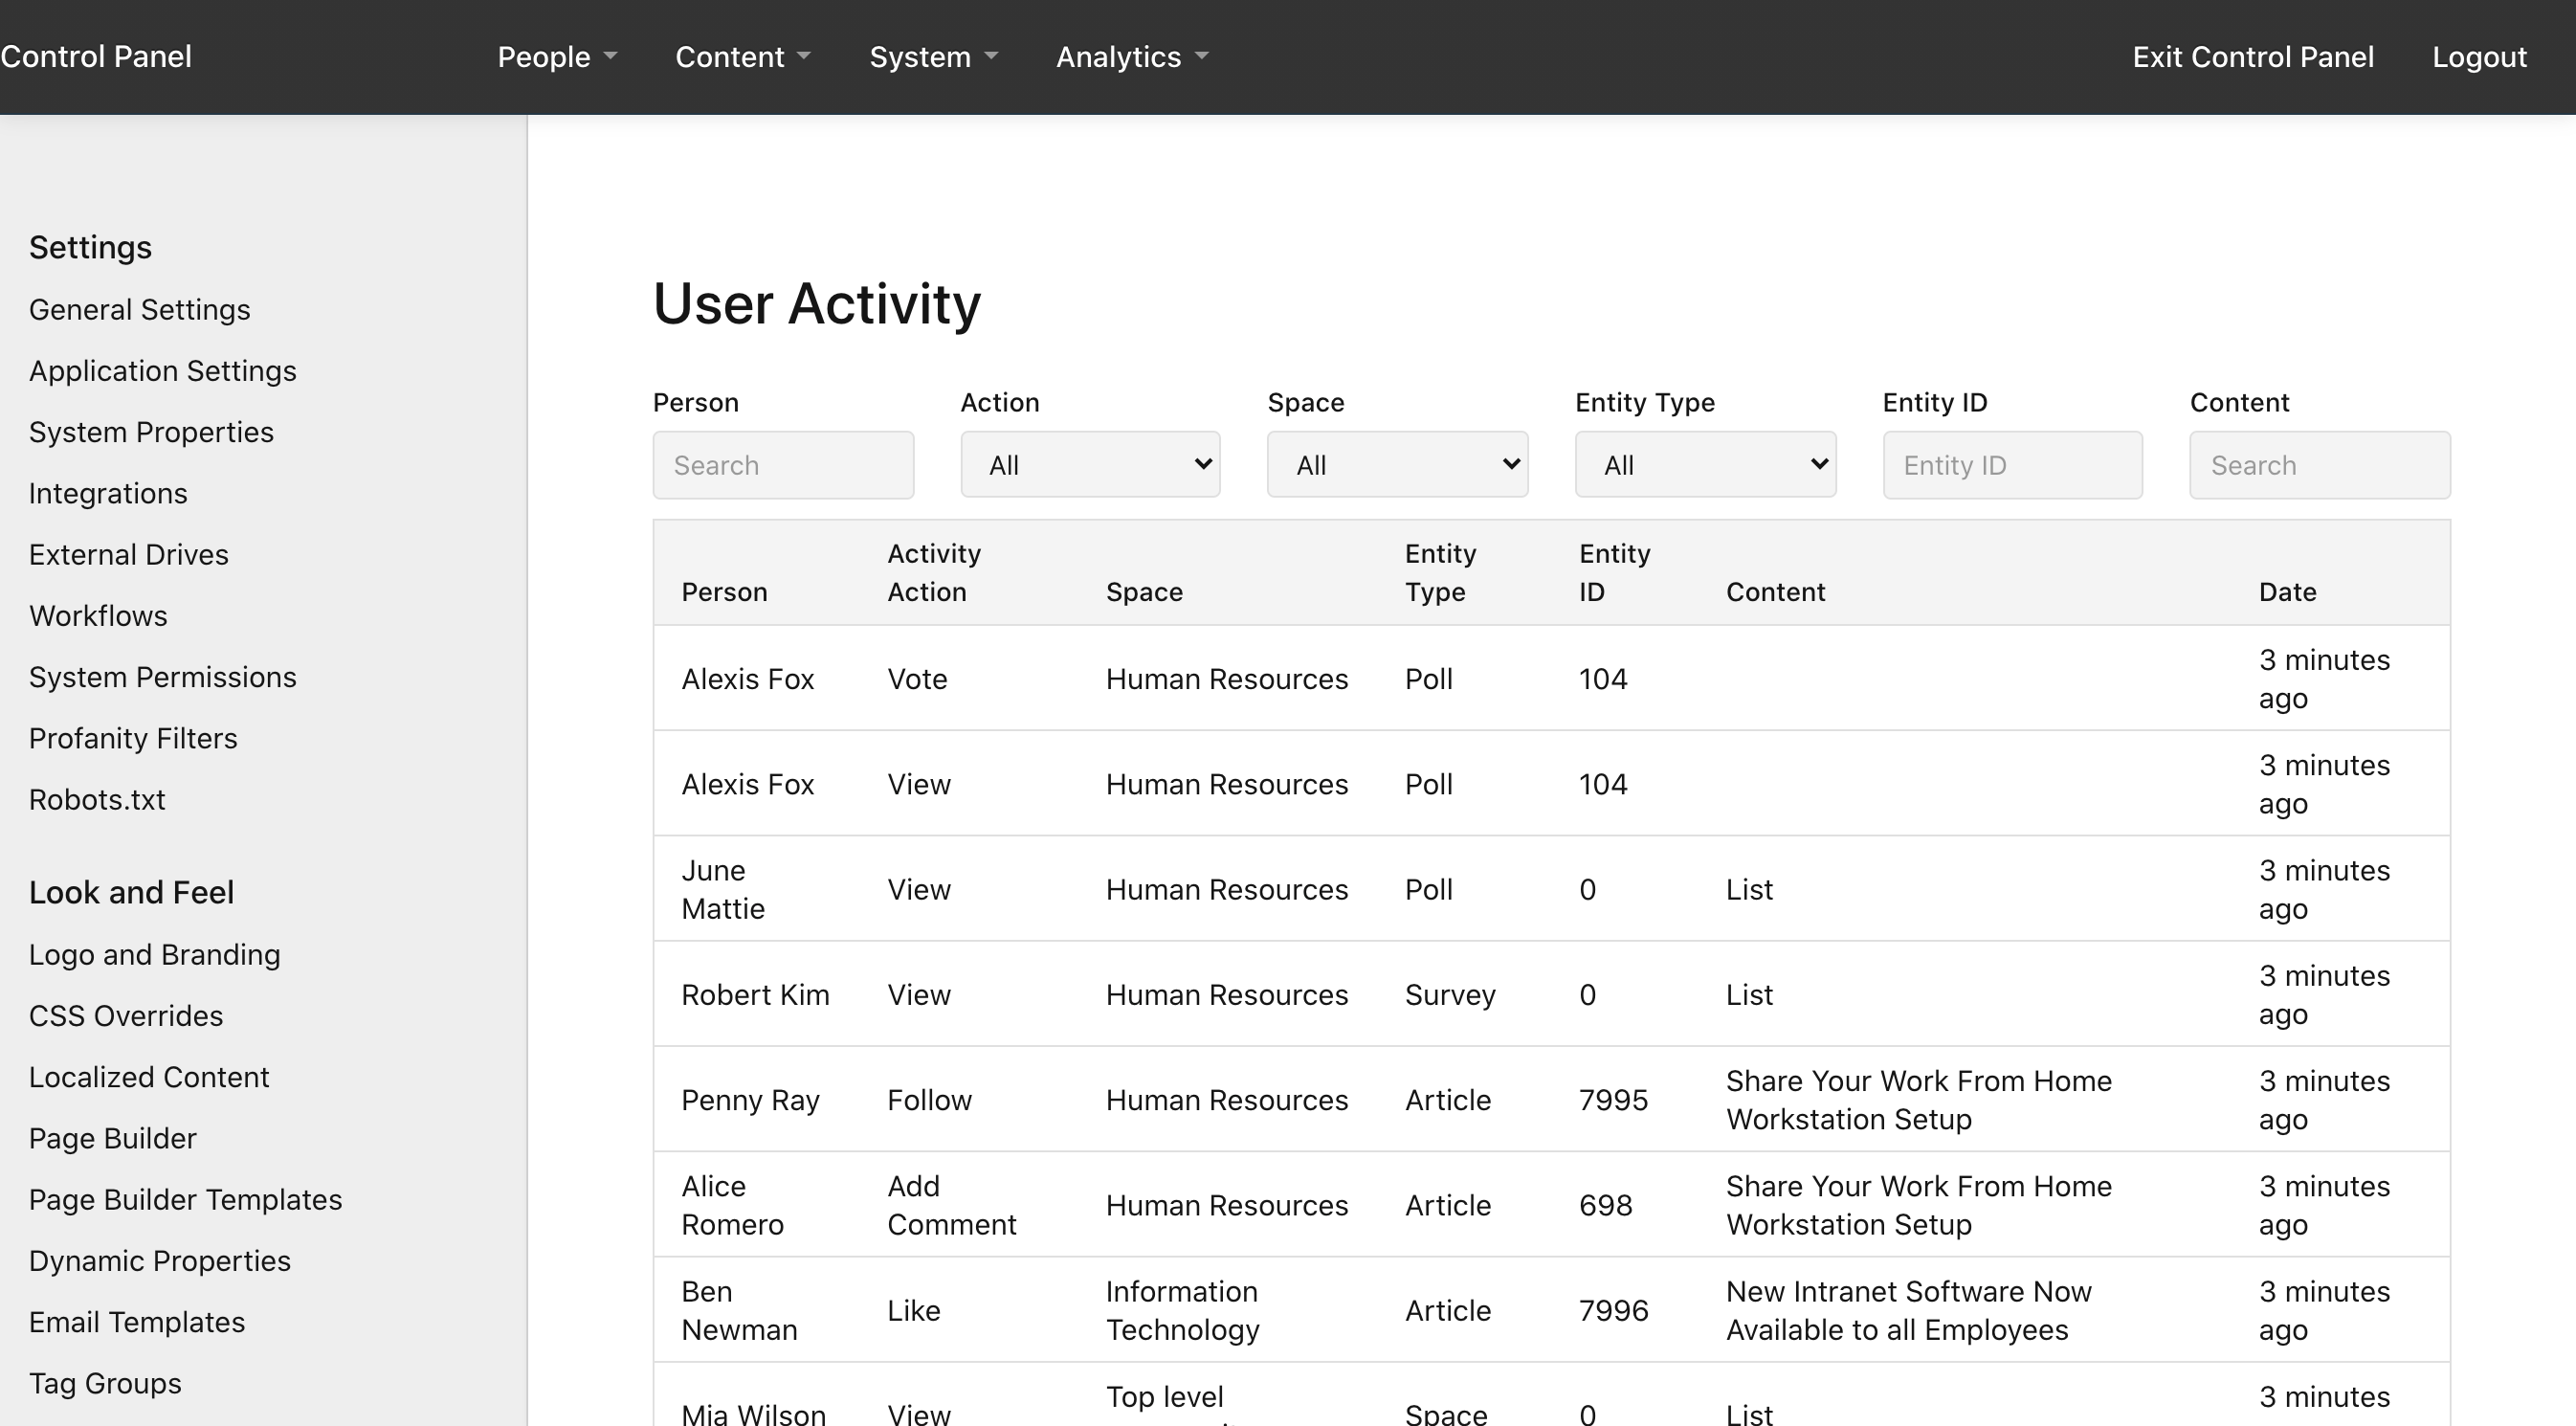 The user activity page